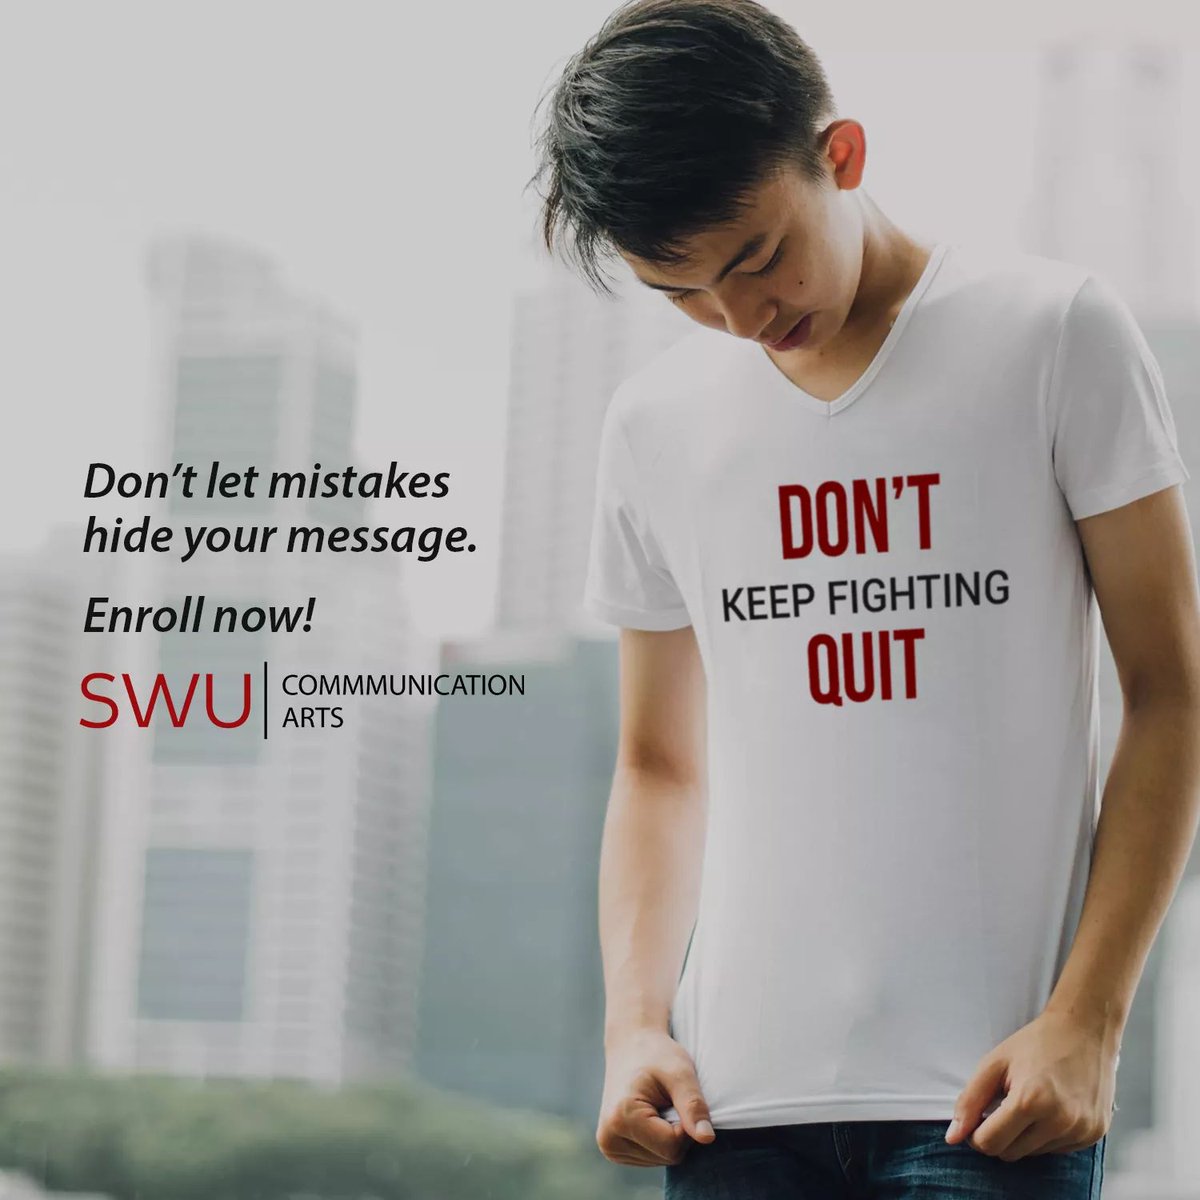 Do it right. Say it right. Learn how at SWU PHINMA's School of Design & Communication. #swunext #designforpeople